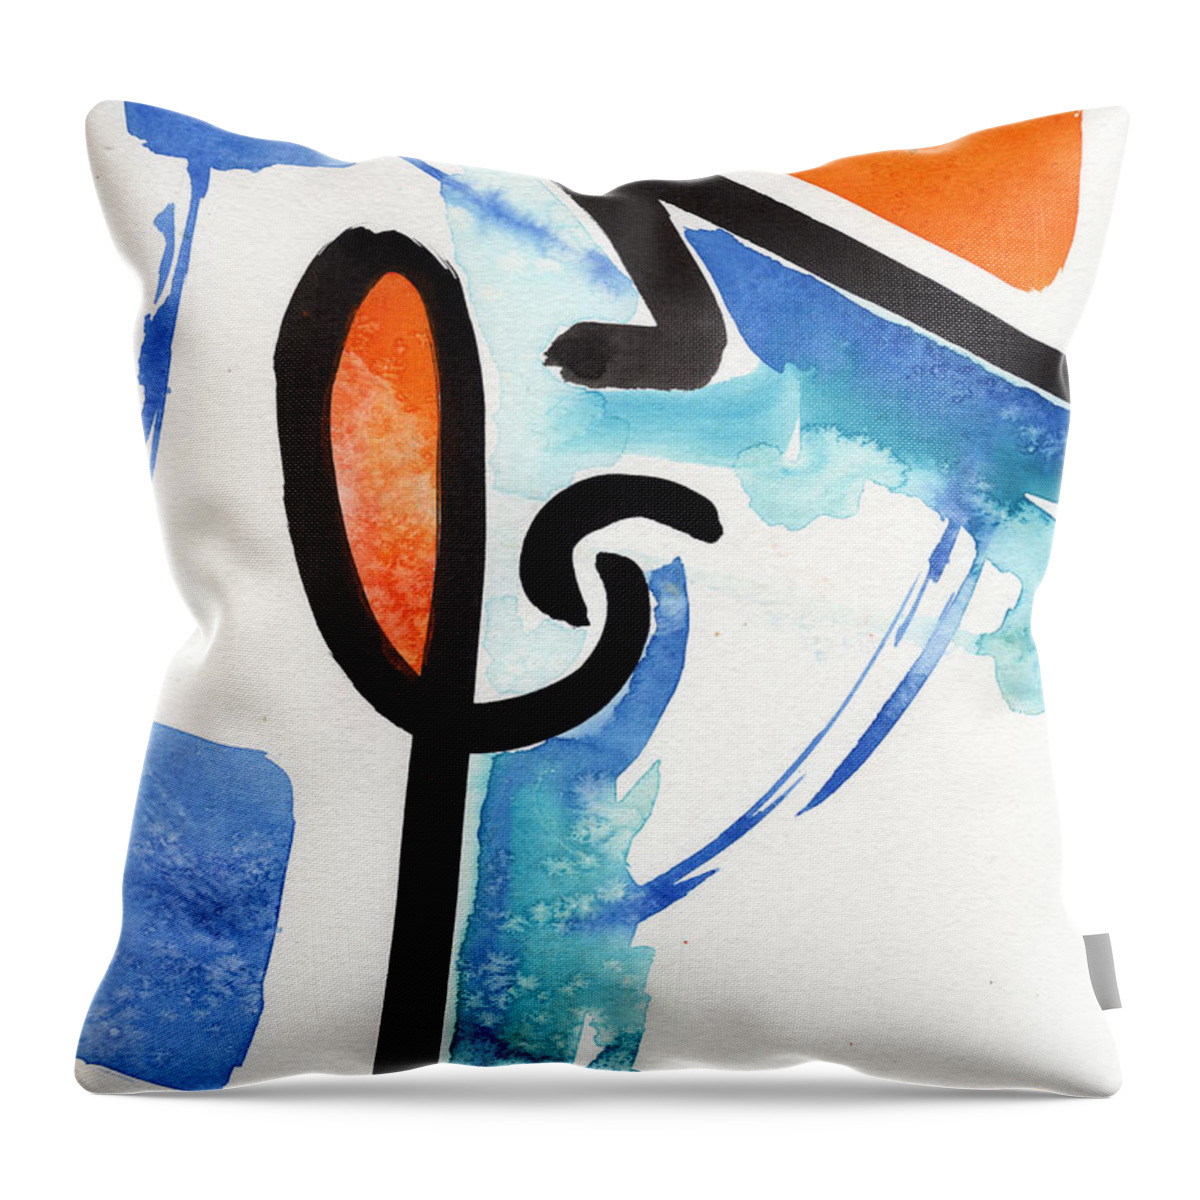 Abstract Throw Pillow featuring the painting Modern Intuitive Abstract Blue Dance Black Lines by Ginette Callaway